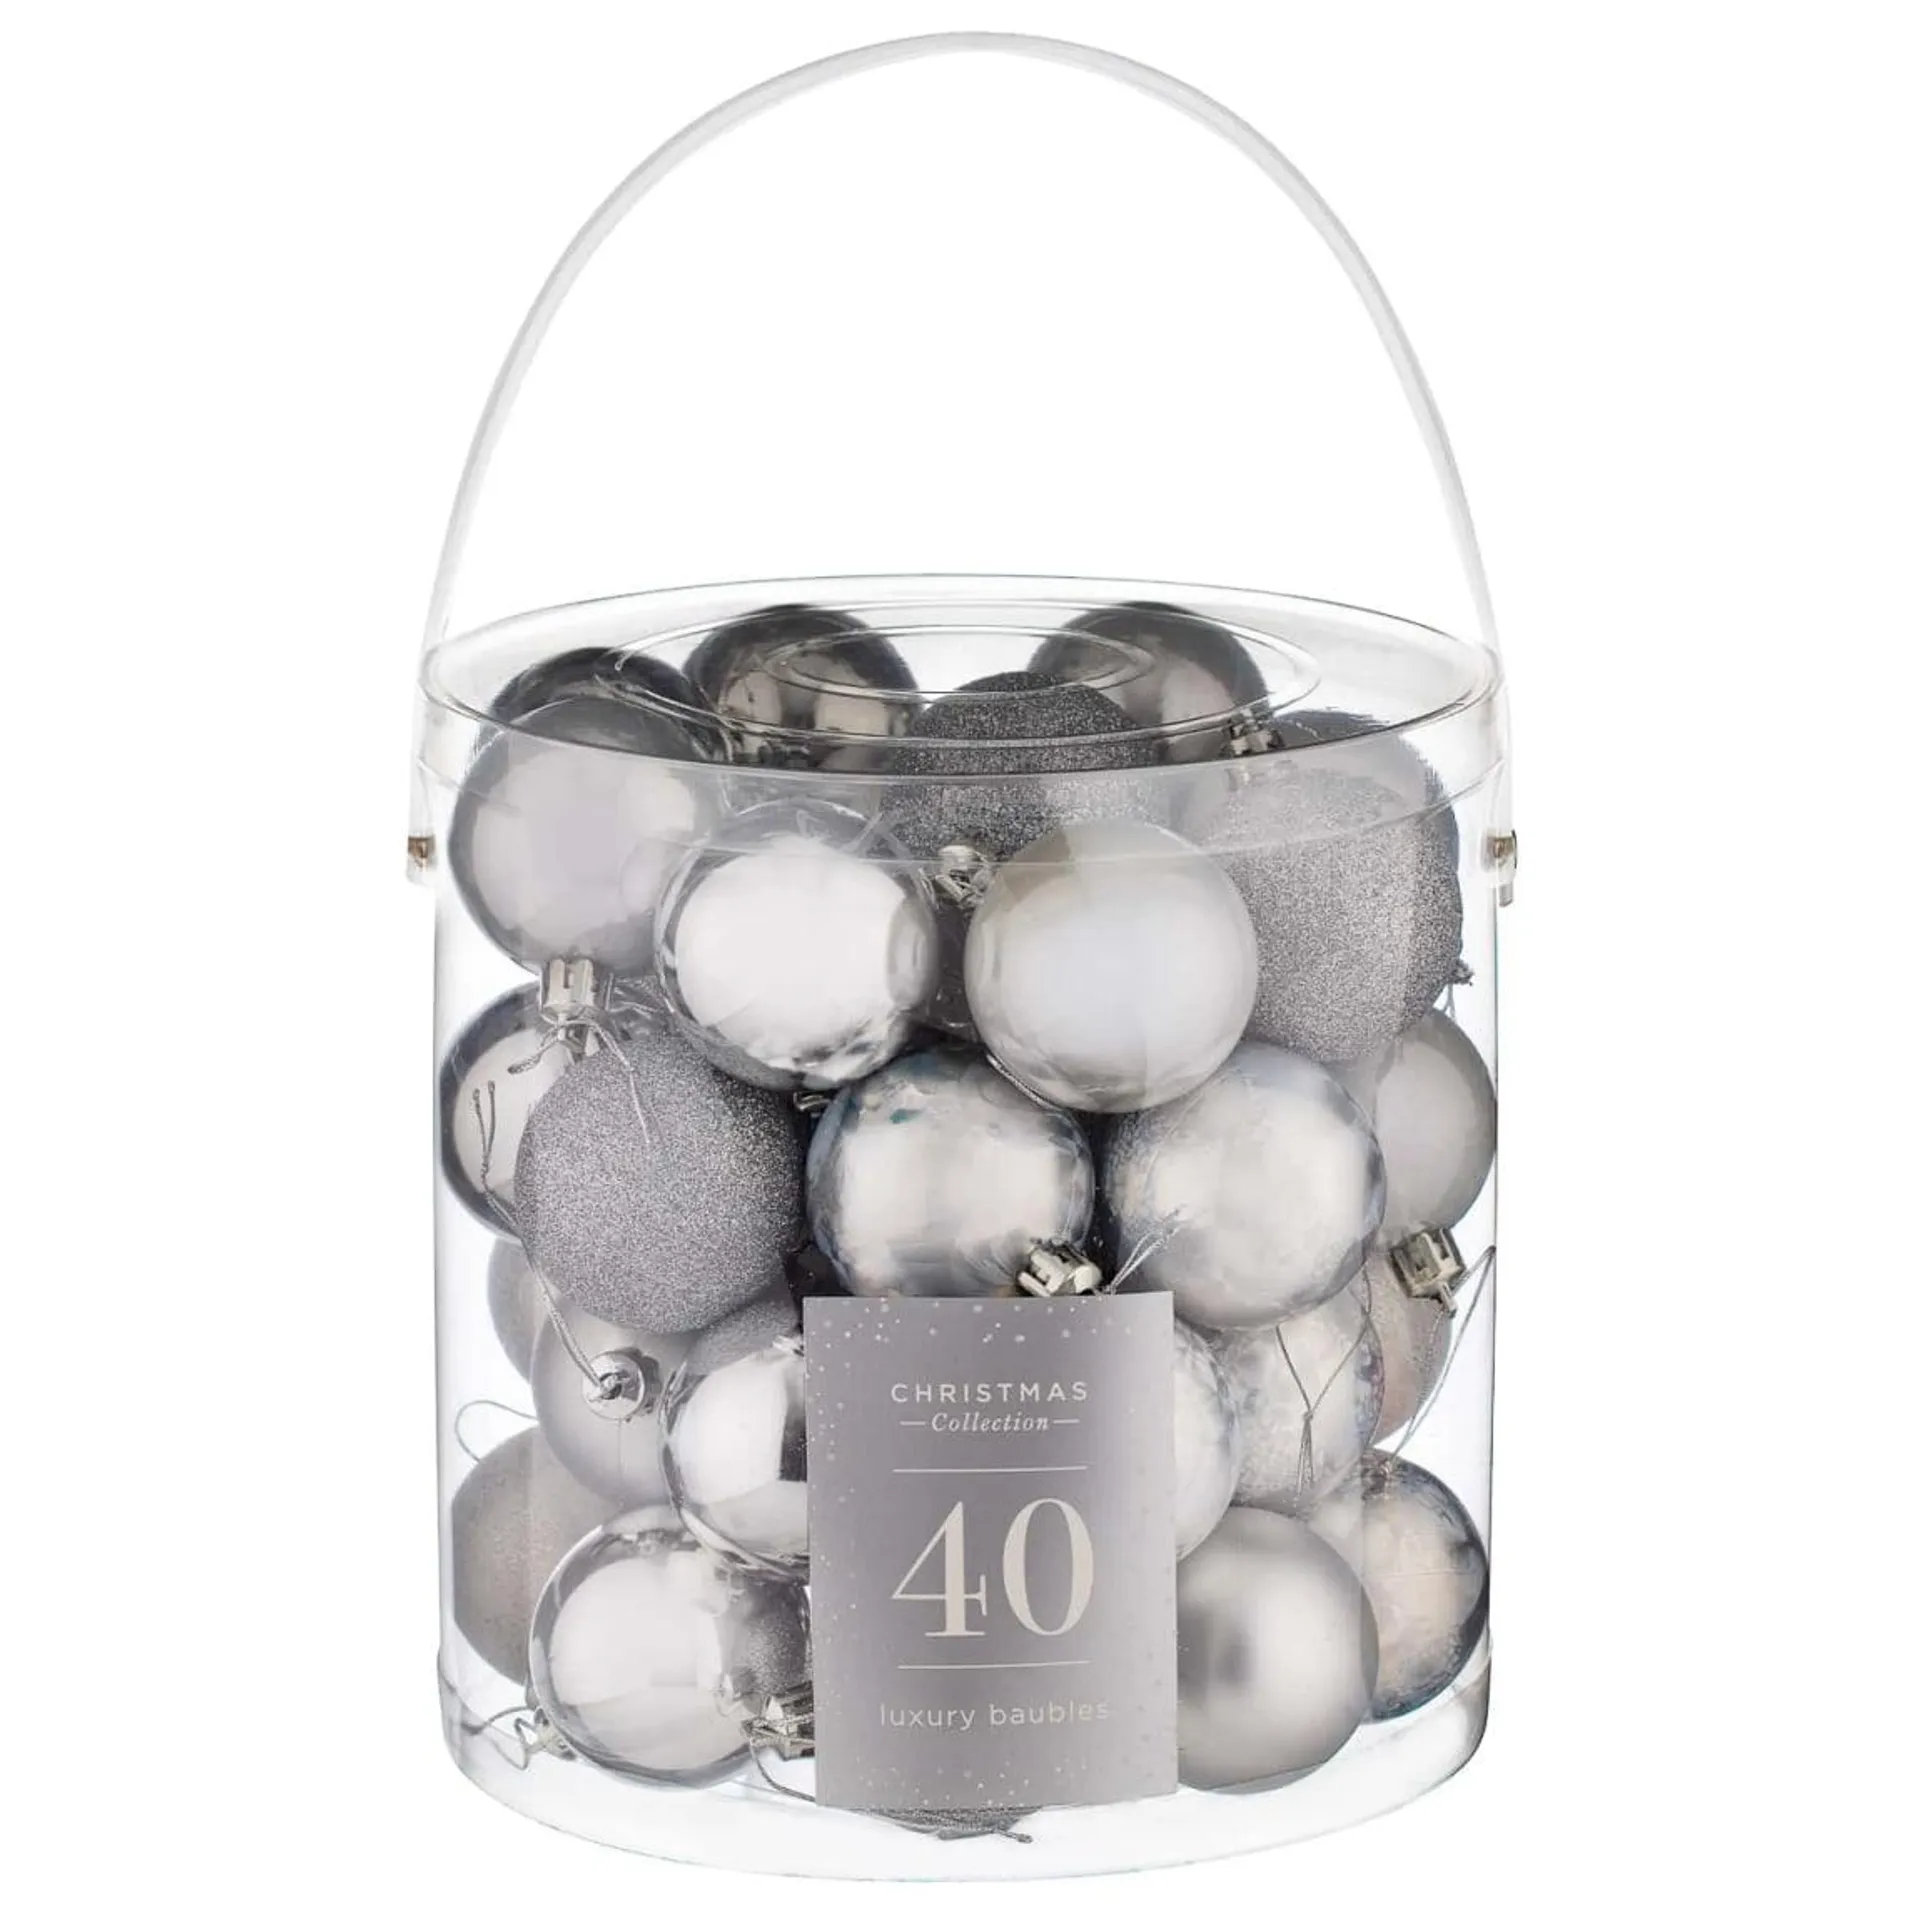 Christmas Collection Luxury Baubles 40pk - Silver